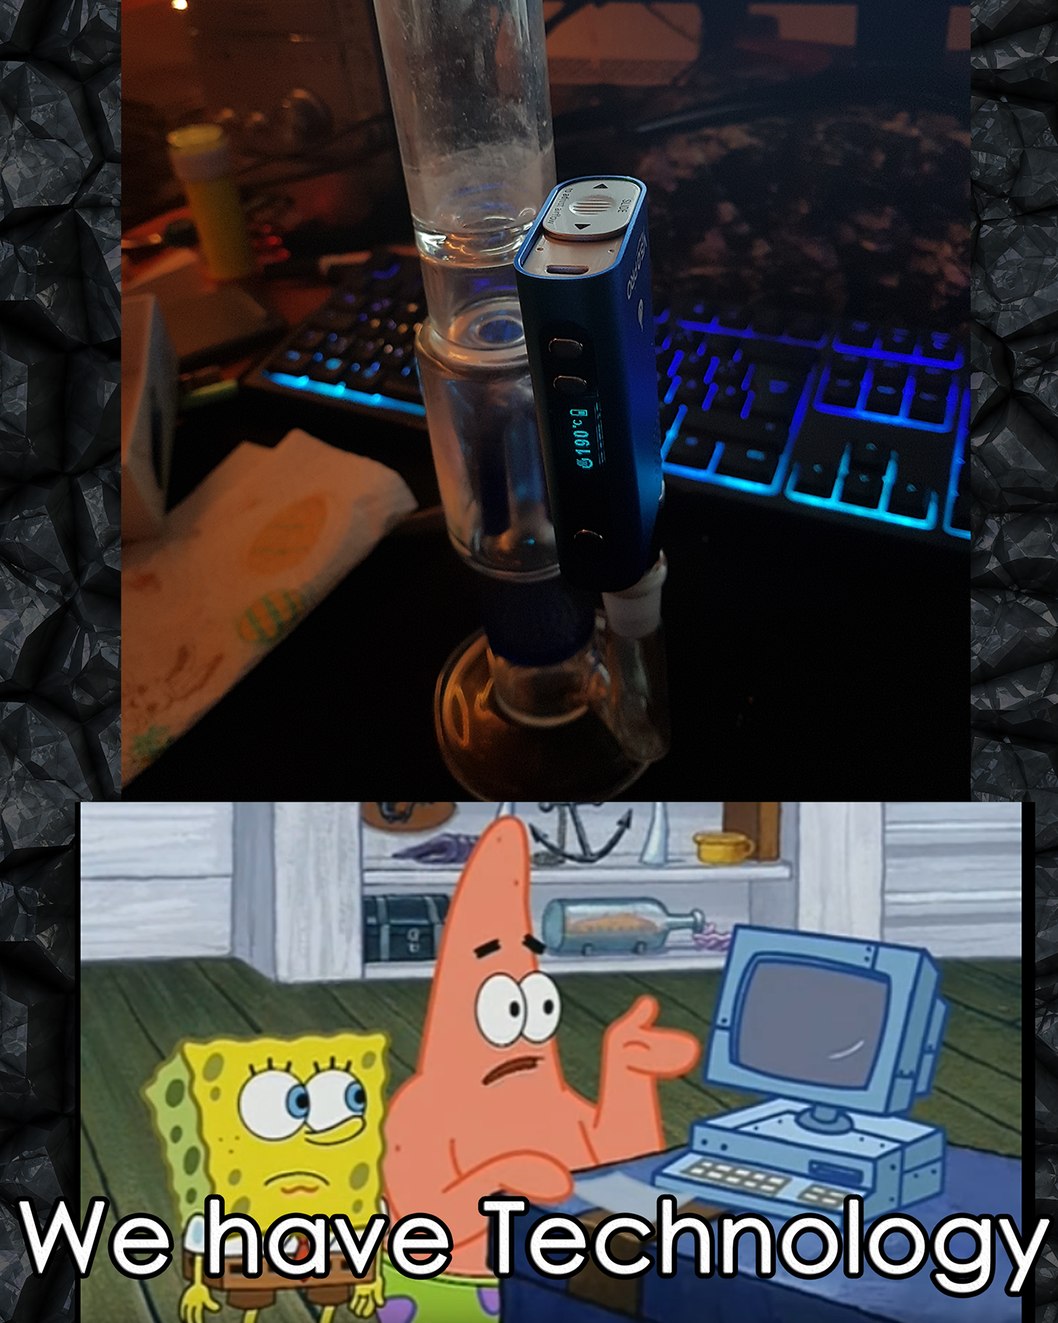 the only good way of vapeing - meme